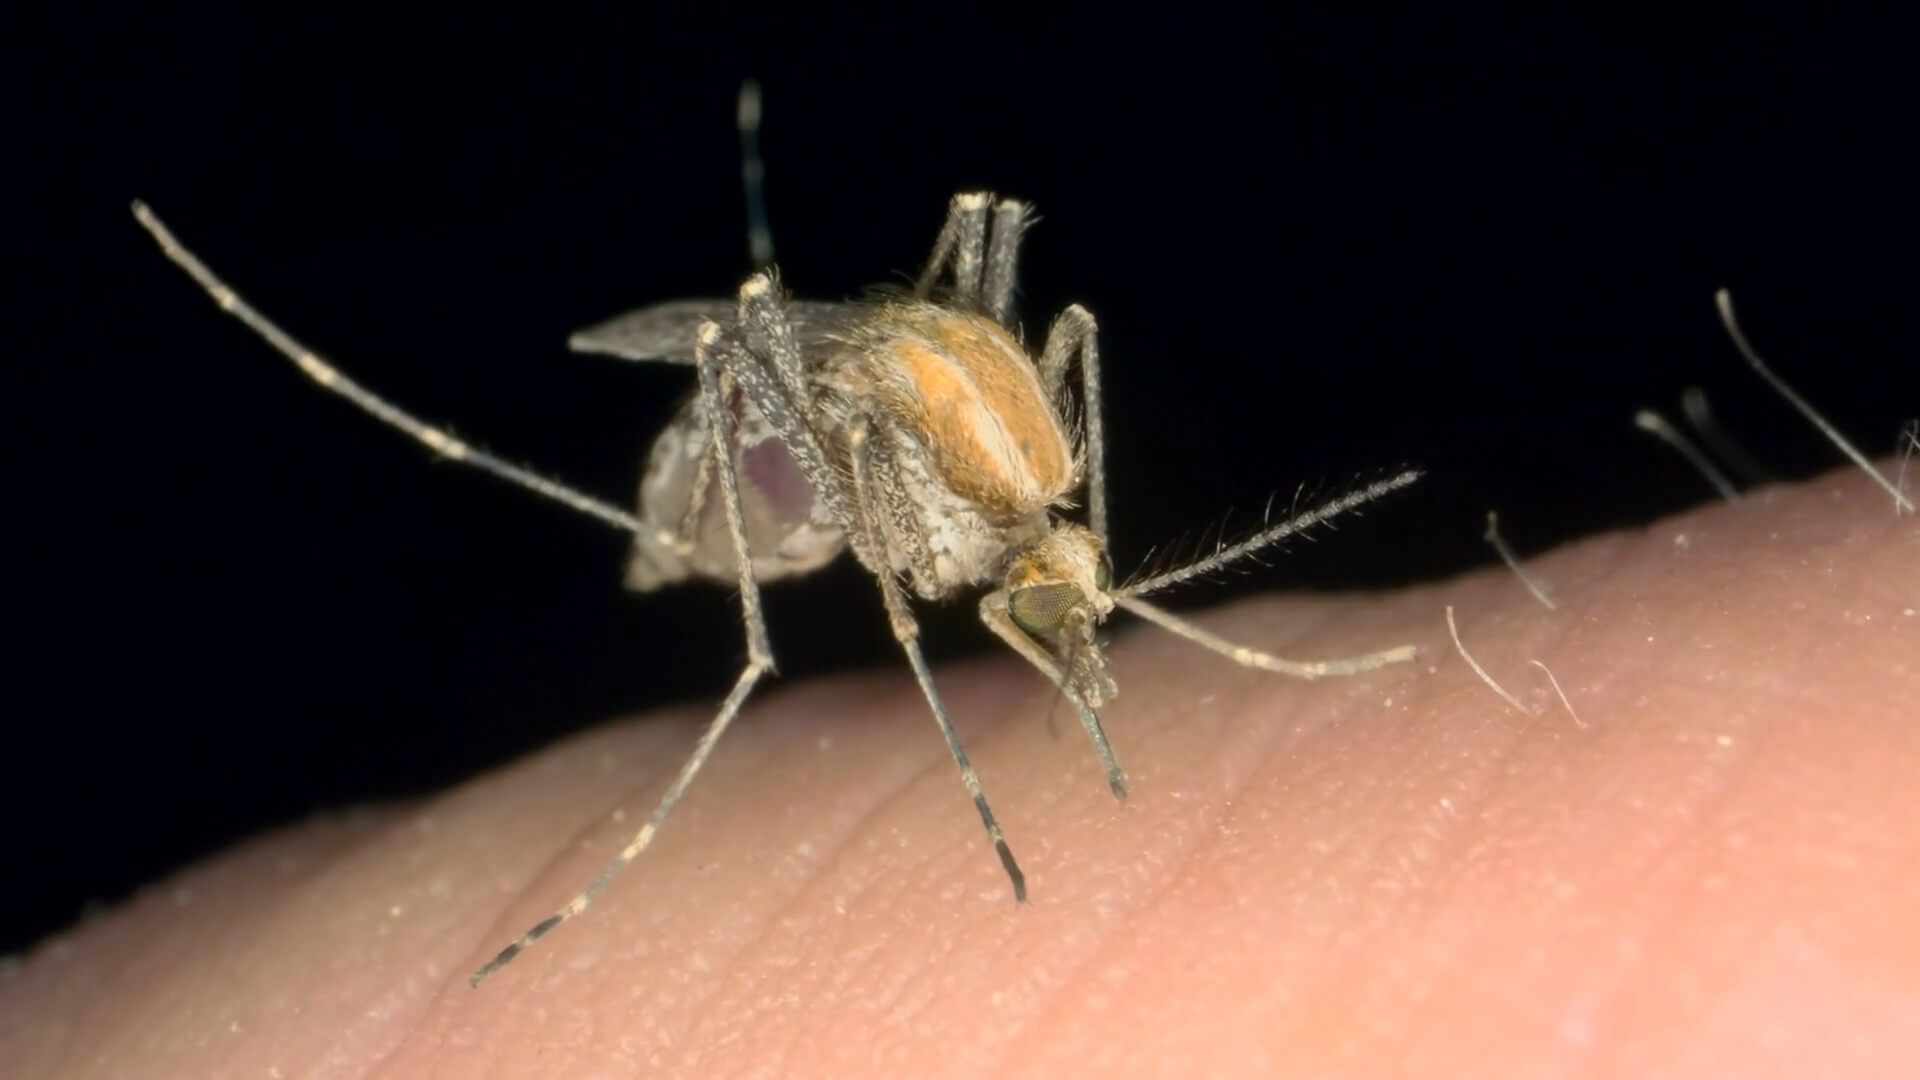 Close-up image of a mosquito resting on a man's hand